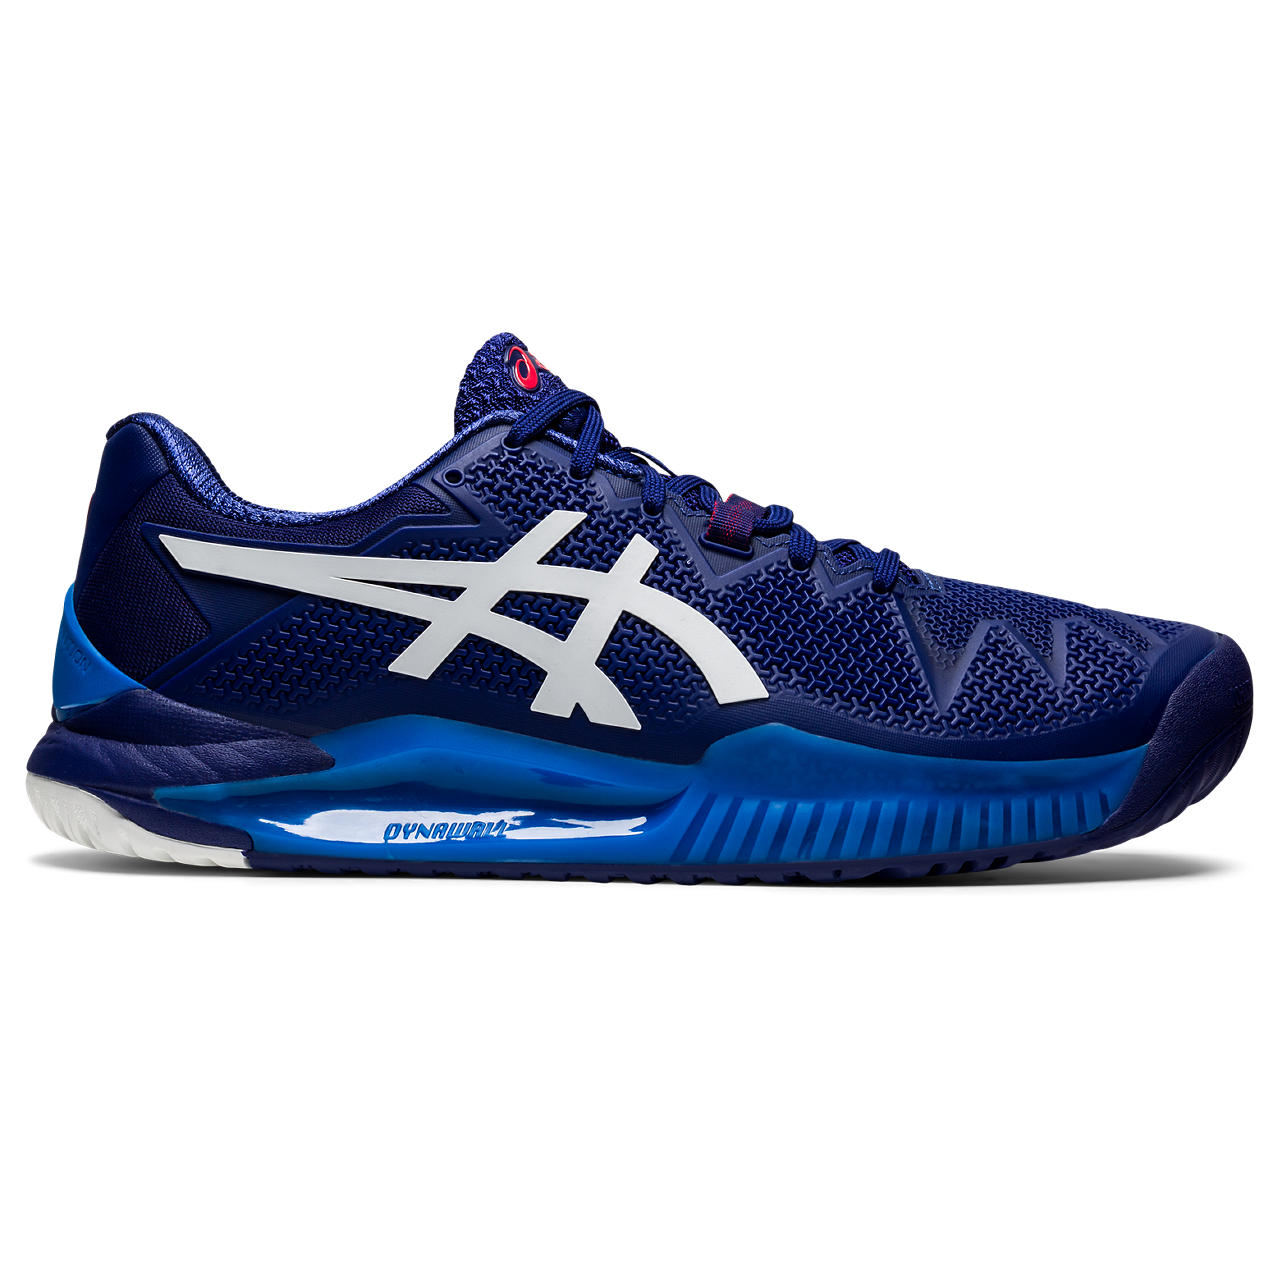 Lateral view of the Men's ASIC Gel Resolution 8 tennis shoe in the color Blue